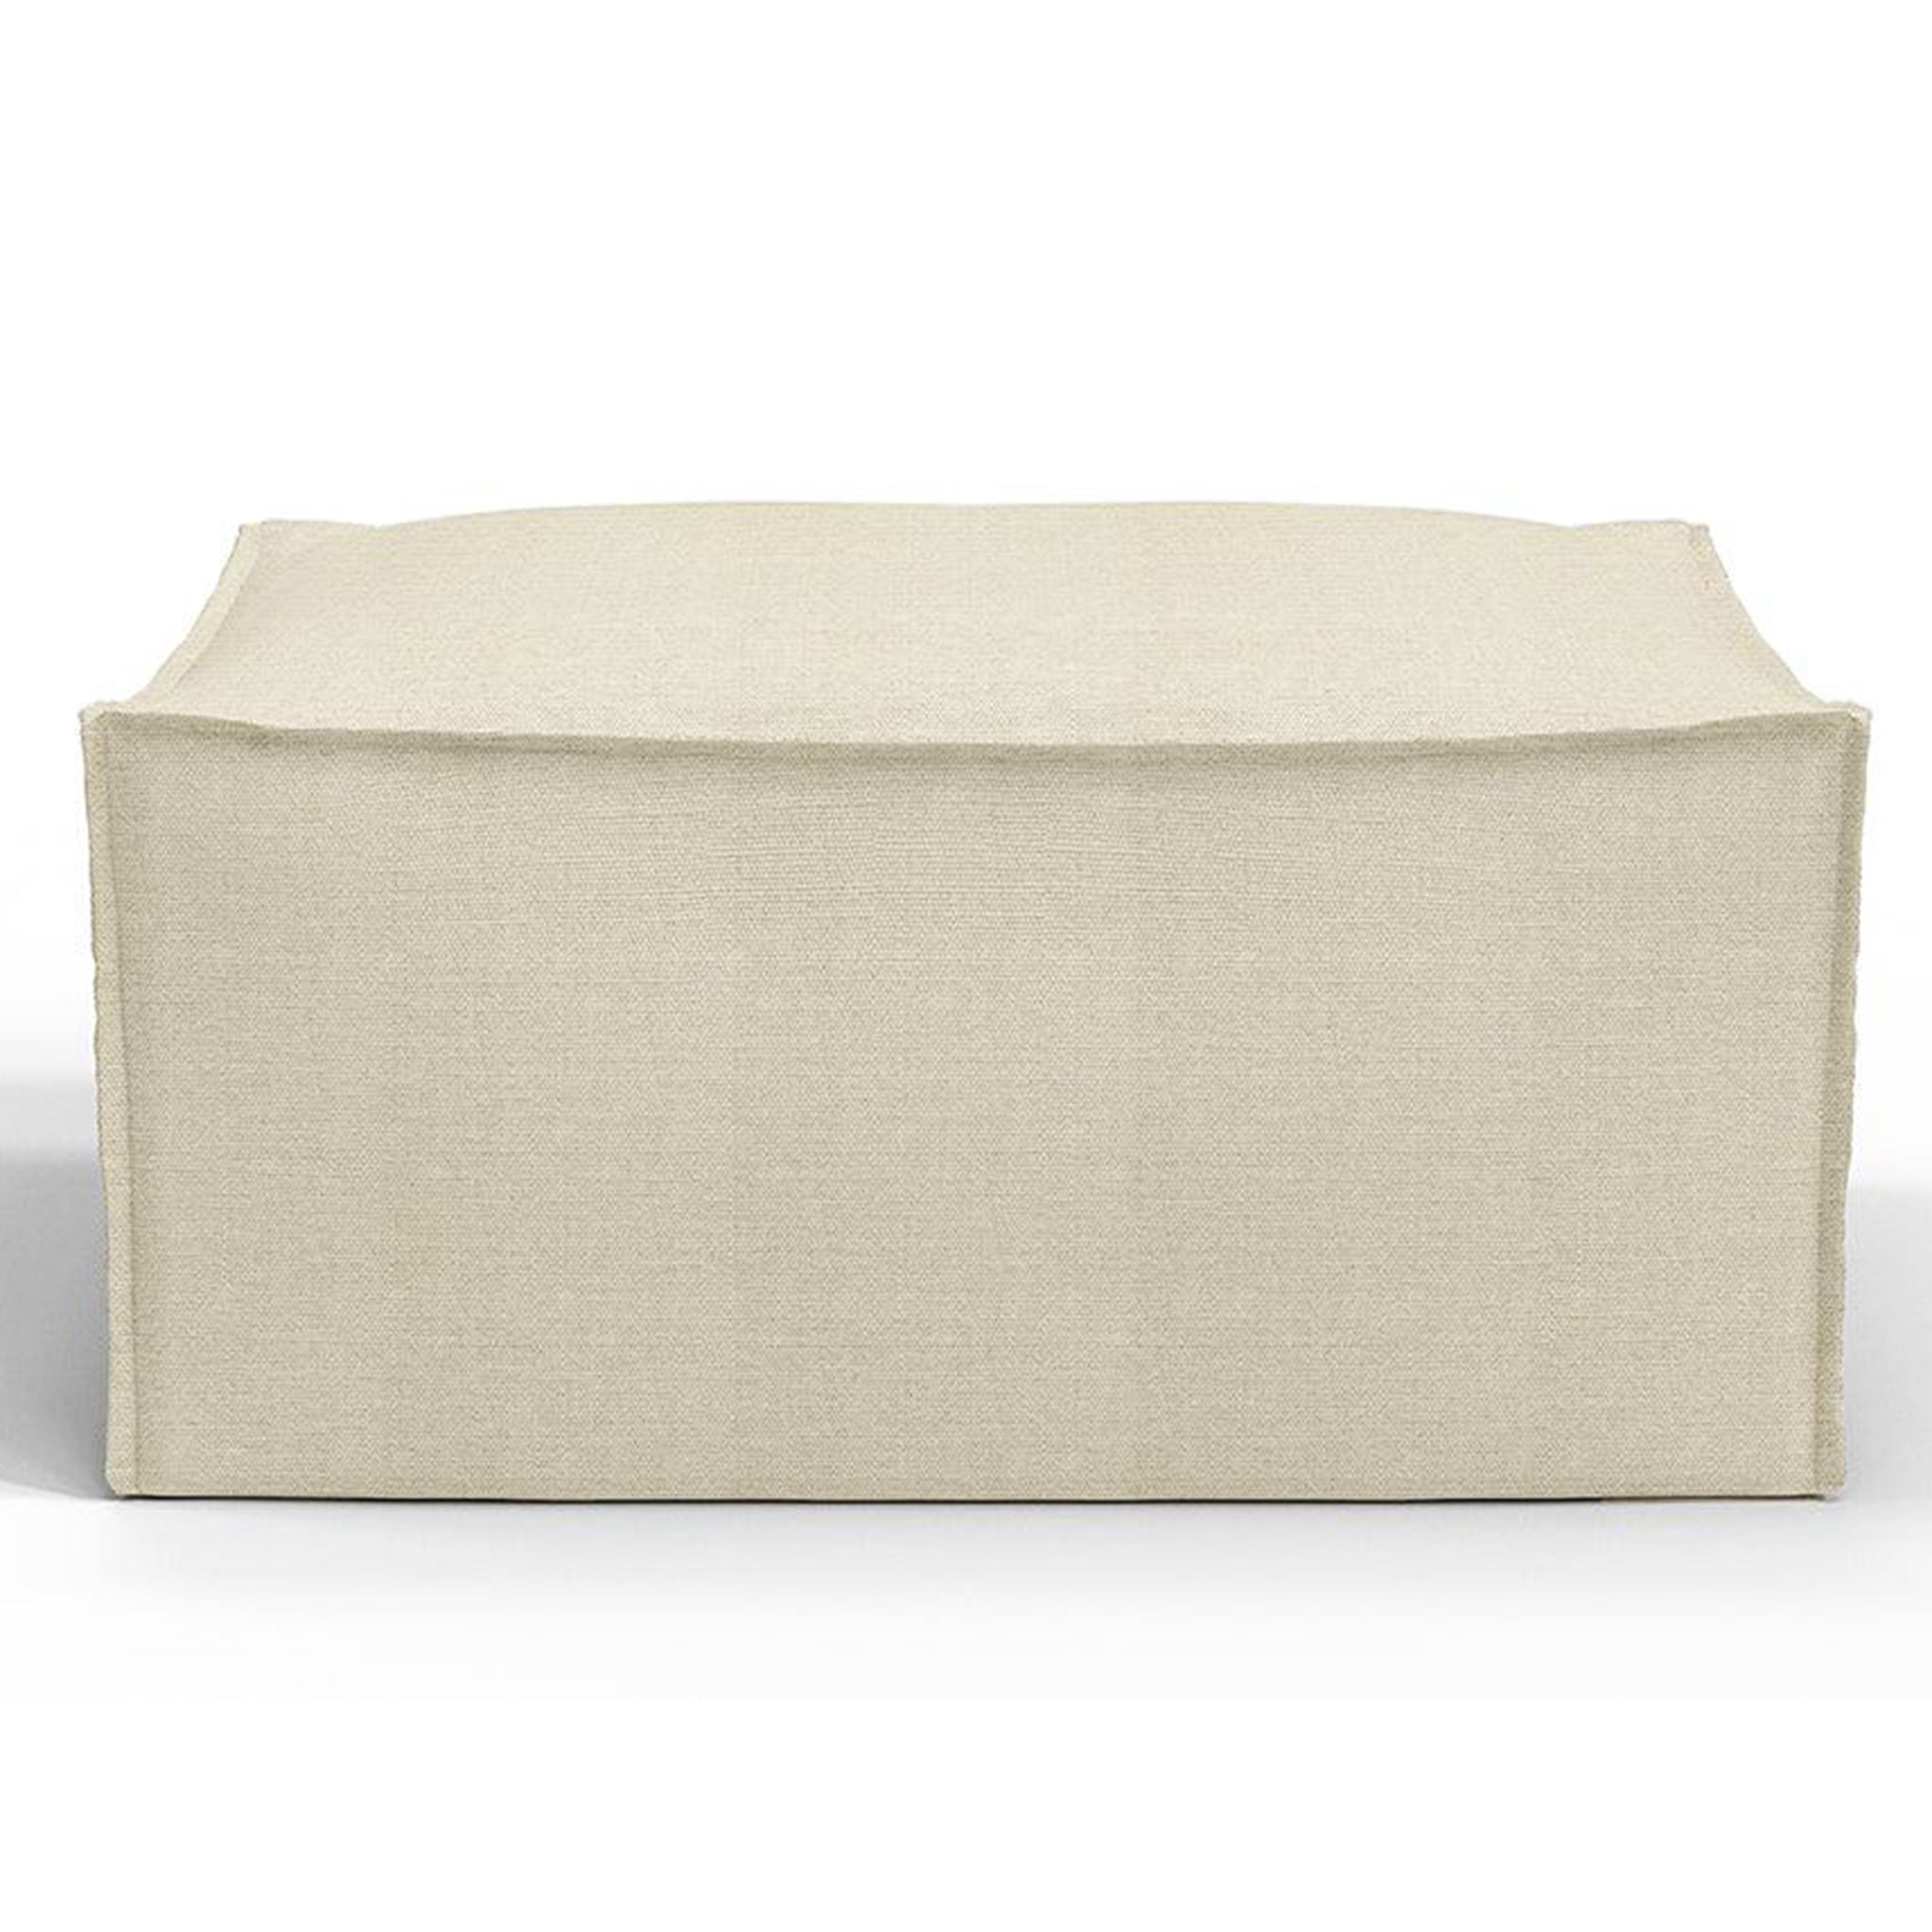 Cream fabric ottoman with a sleek and modern design, perfect for adding a touch of elegance and functionality to any living space.